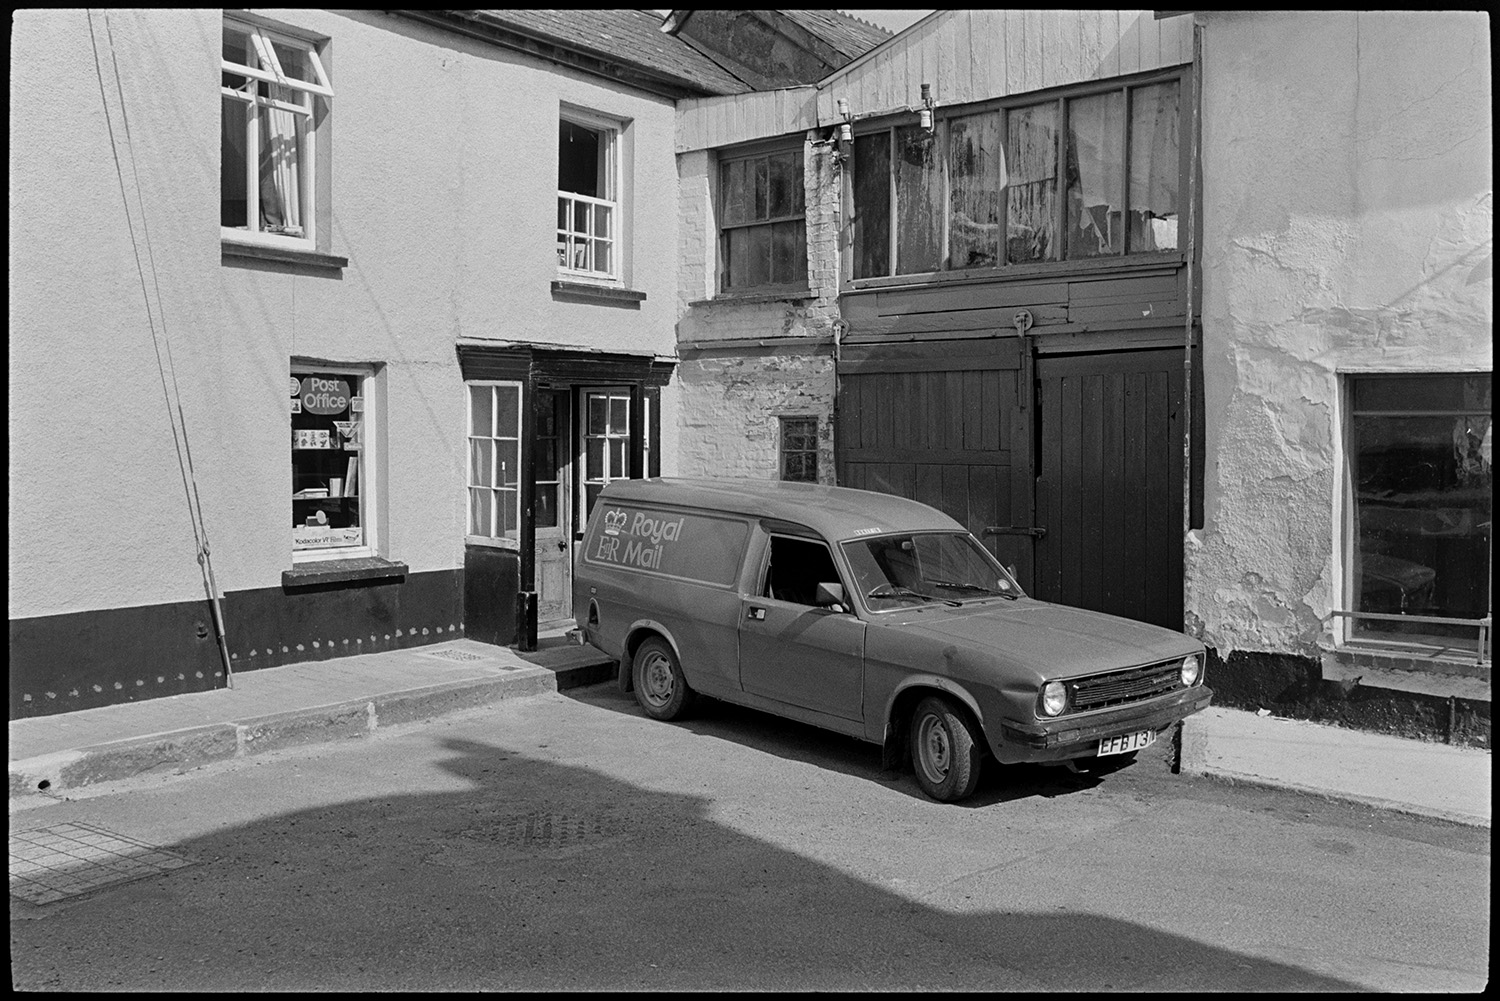 Street scene with Post Office. 
[A Royal Mail van parked outside Winkleigh Post Office and in front of a garage with a wooden door.]